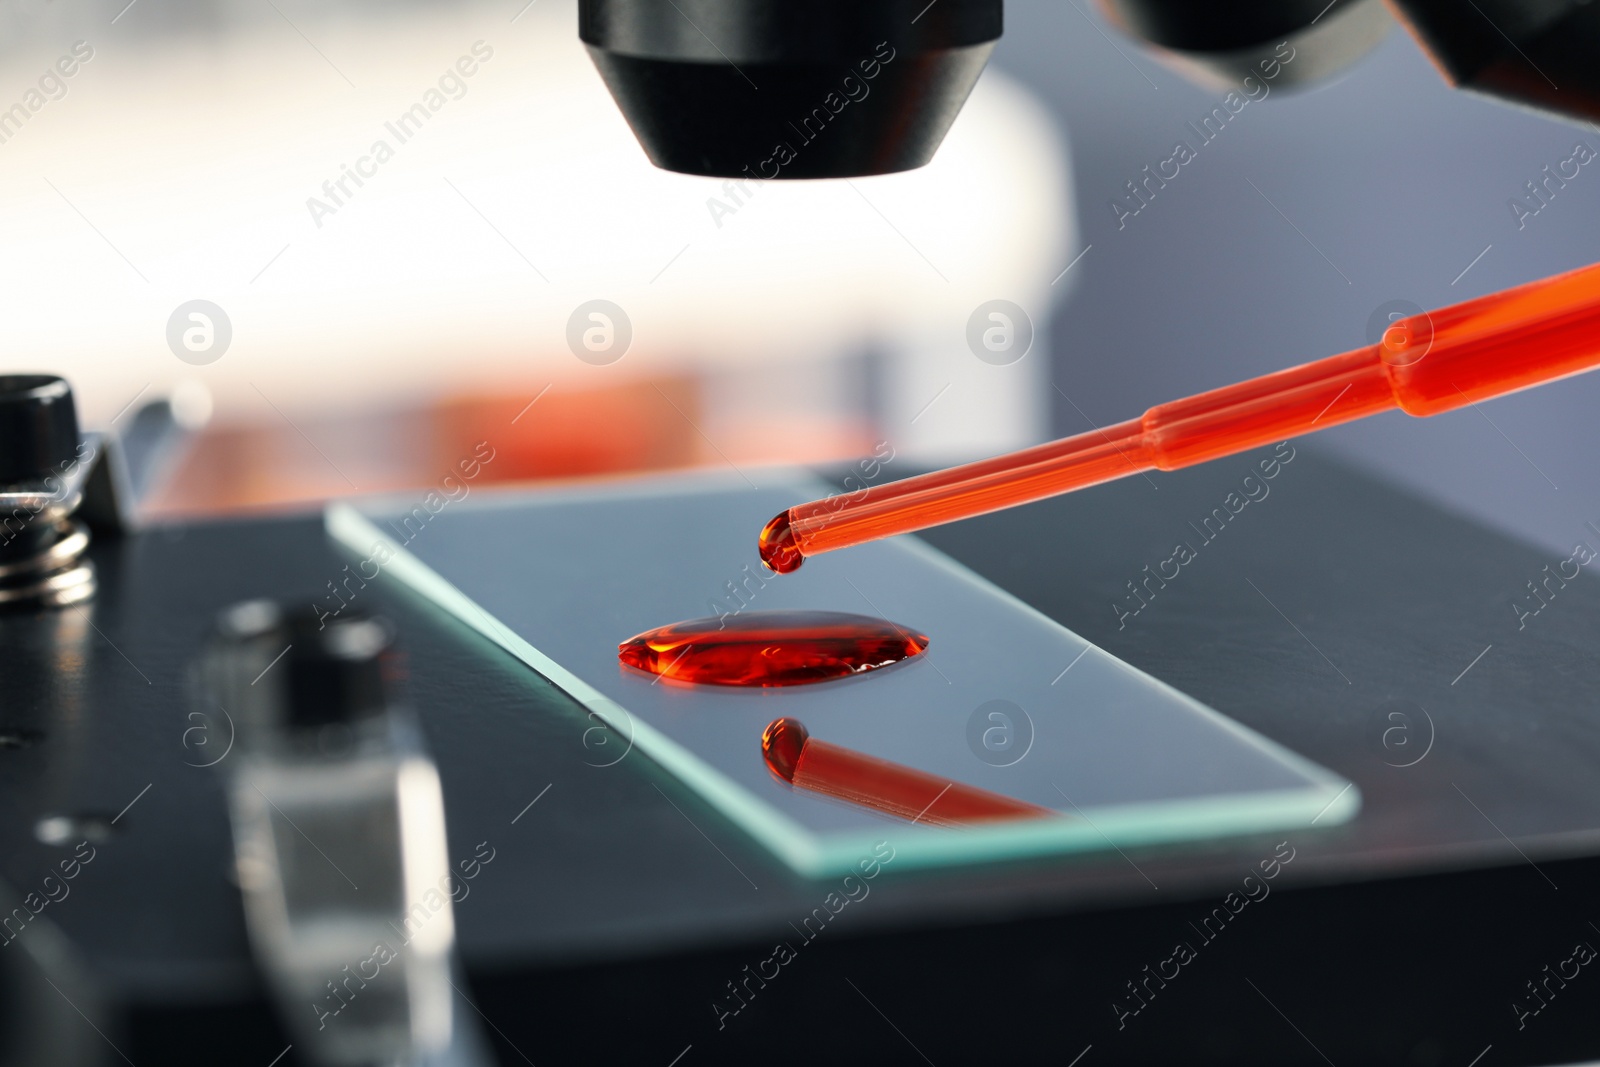 Photo of Dripping sample of red liquid onto slide under microscope in laboratory, closeup